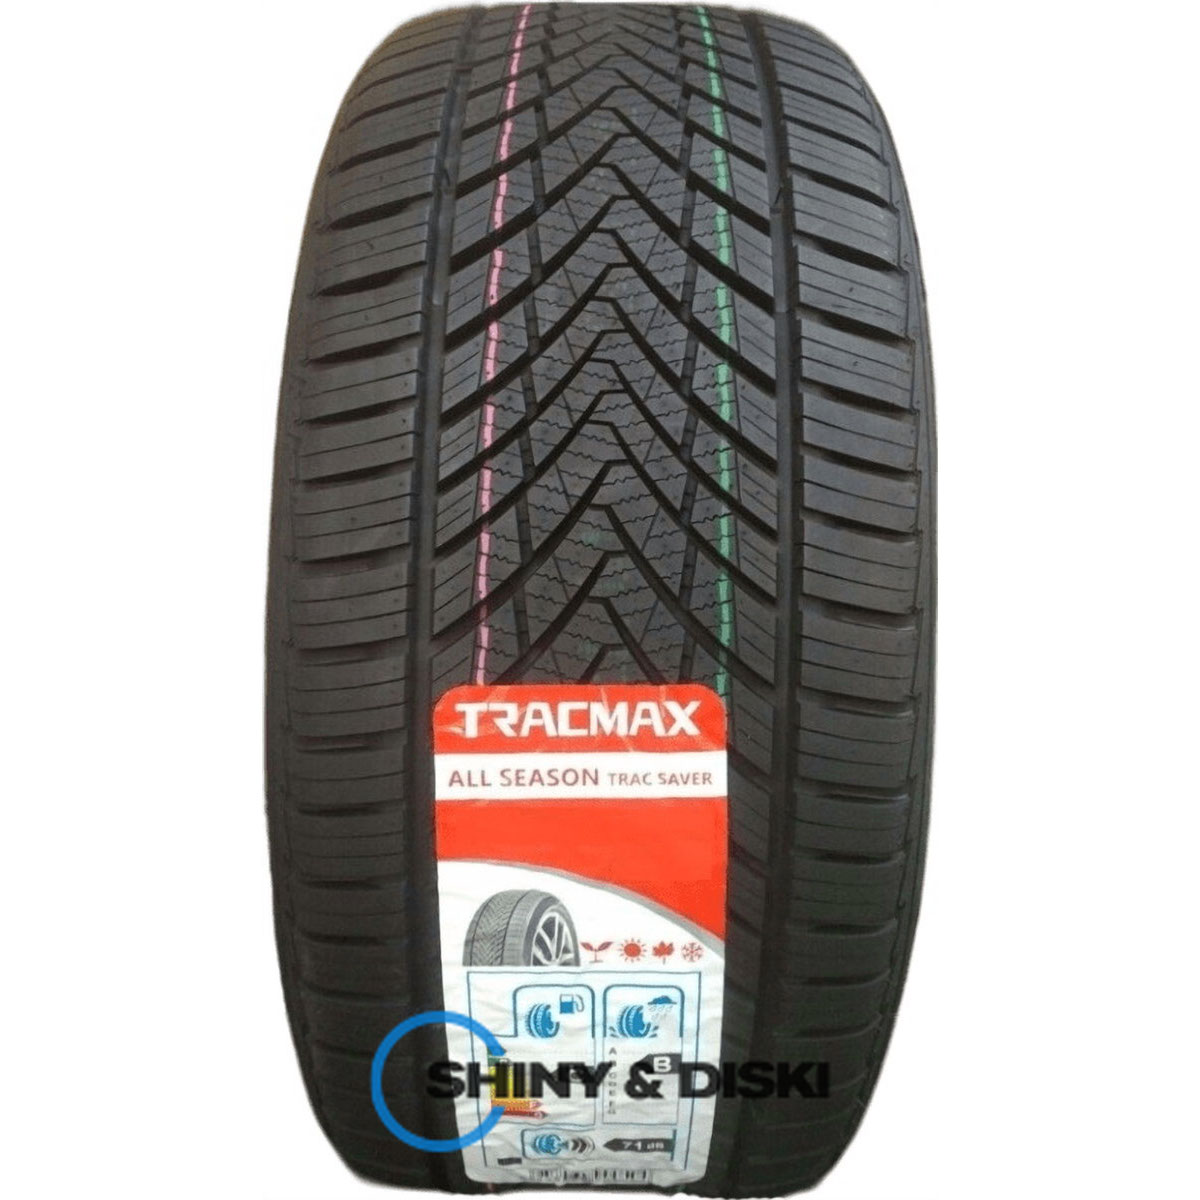 покрышки tracmax a/s trac saver 185/65 r14 86h